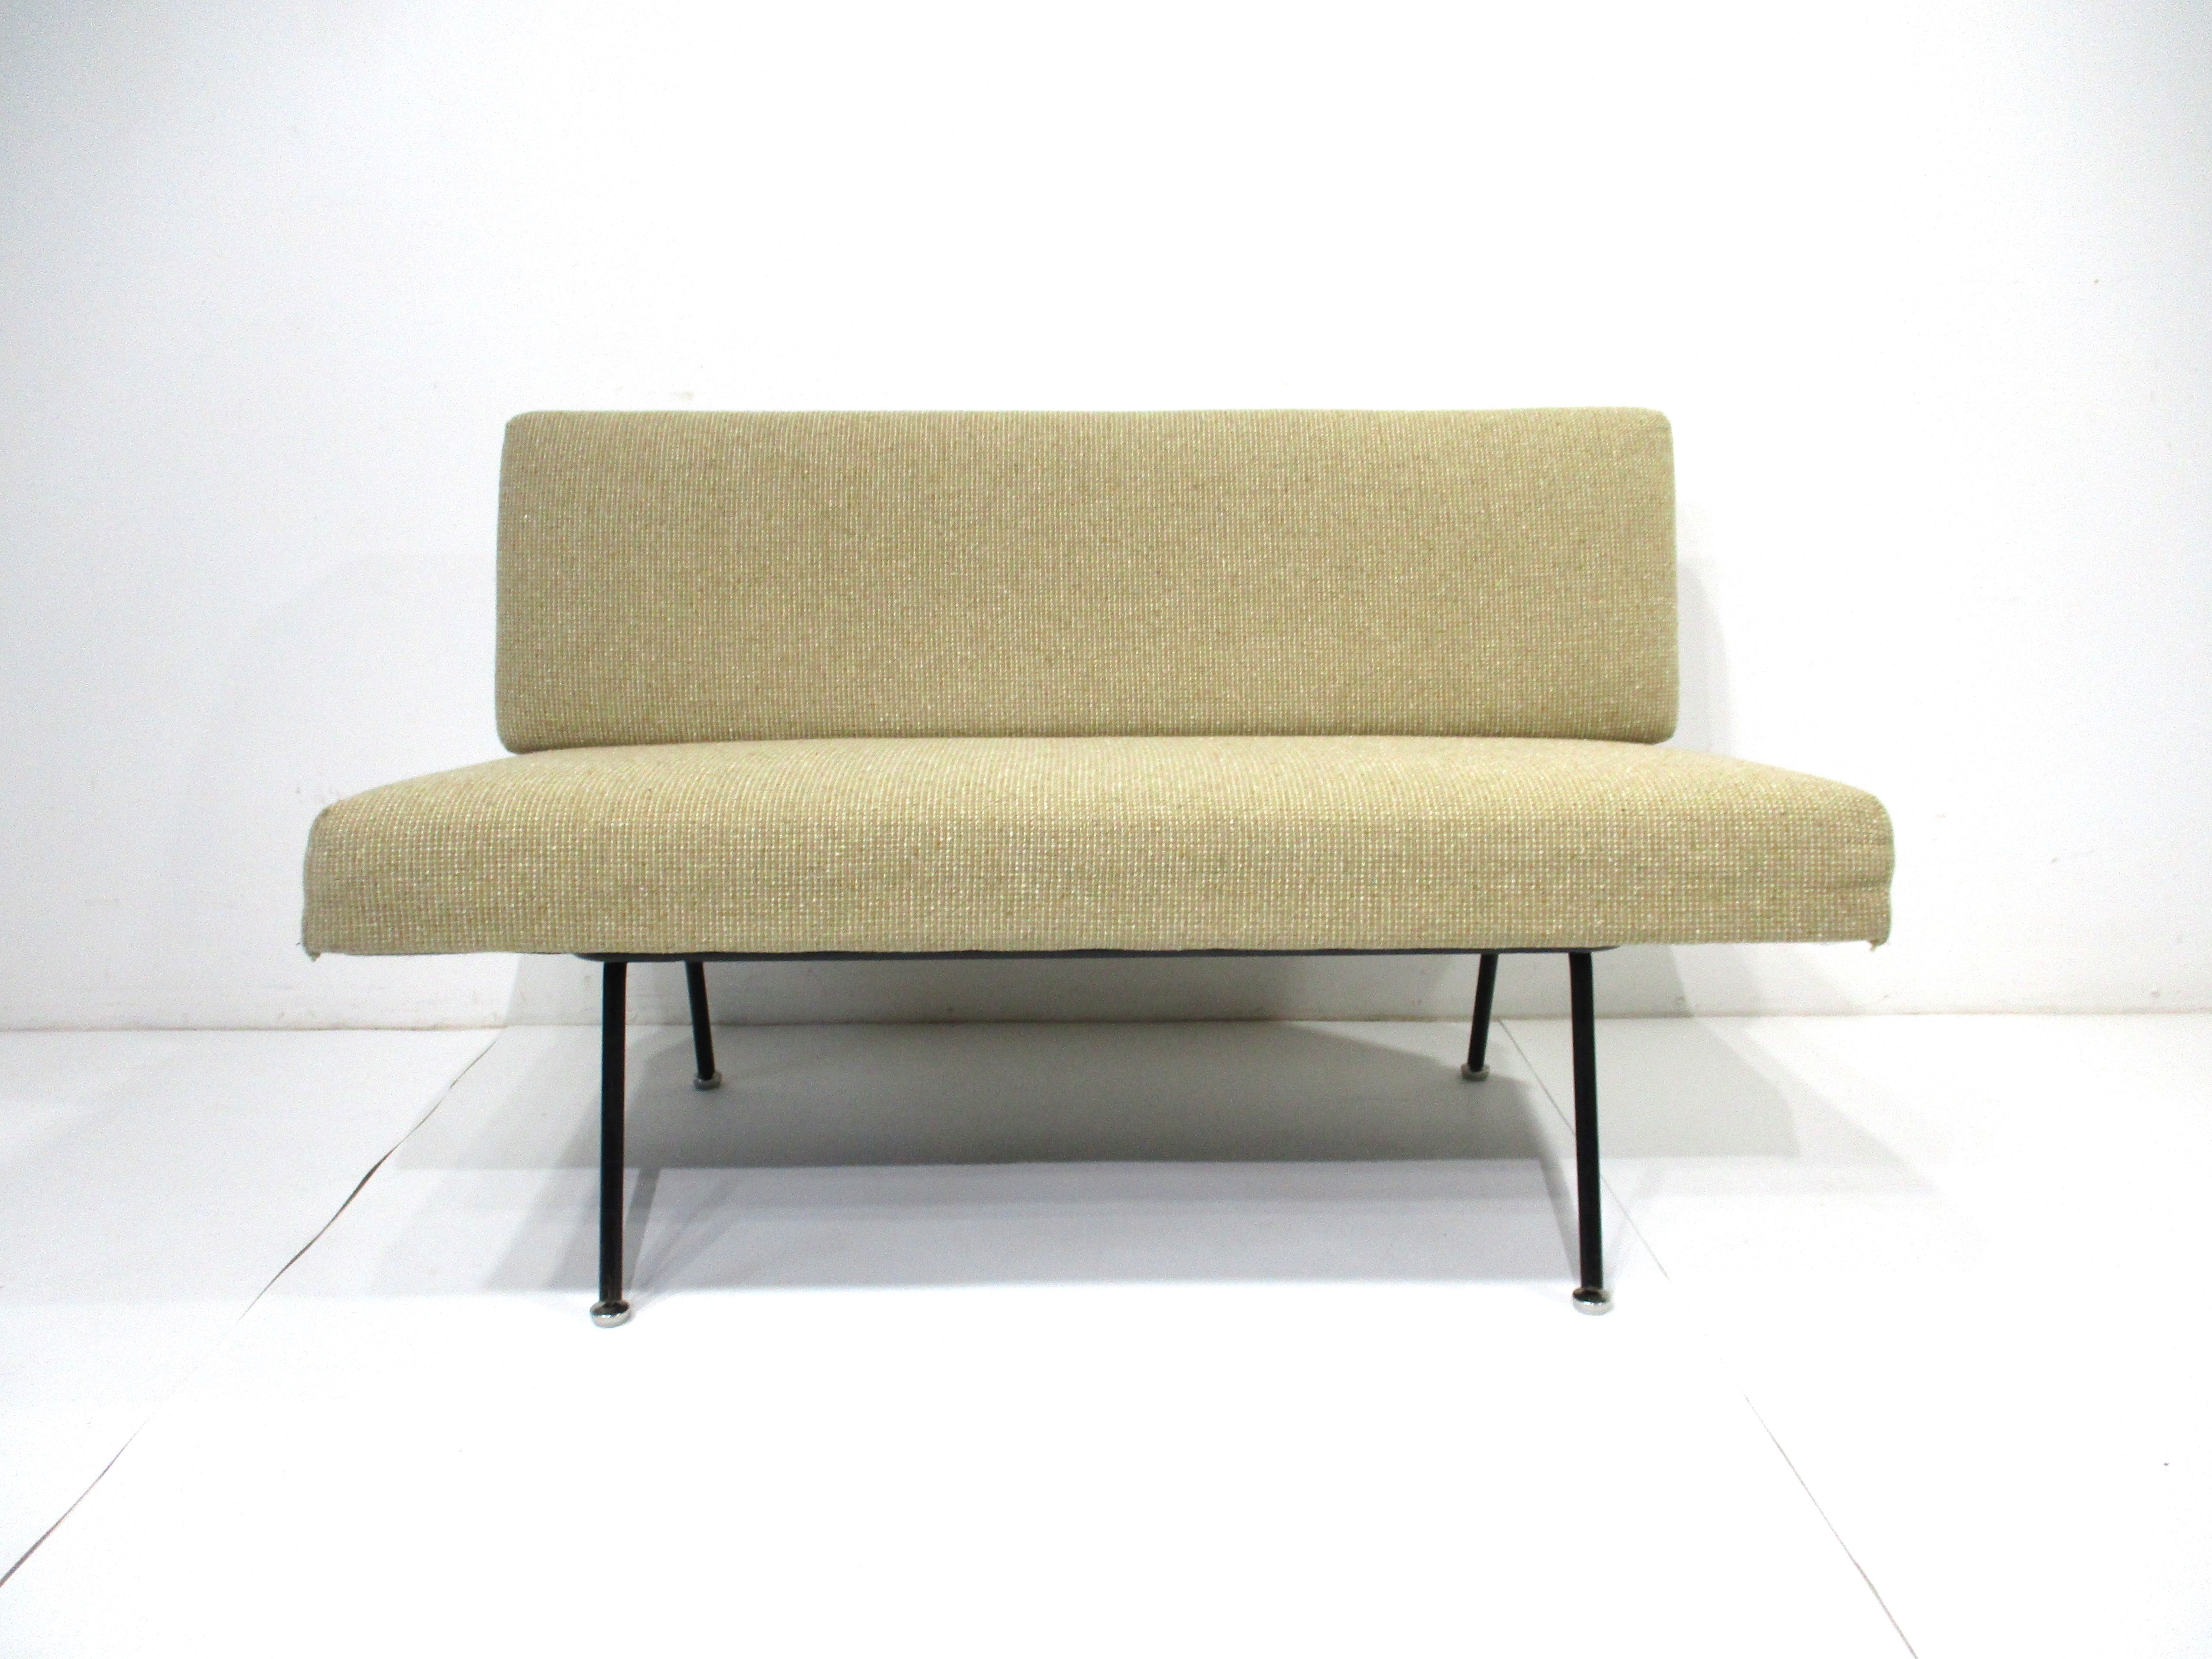 A rare tubular satin black steel framed based settee with oatmeal colored upholstery . Great for a smaller space or an area where you want to keep things simple and light , the sofa is very comfortable and accented with pillows even more so . The